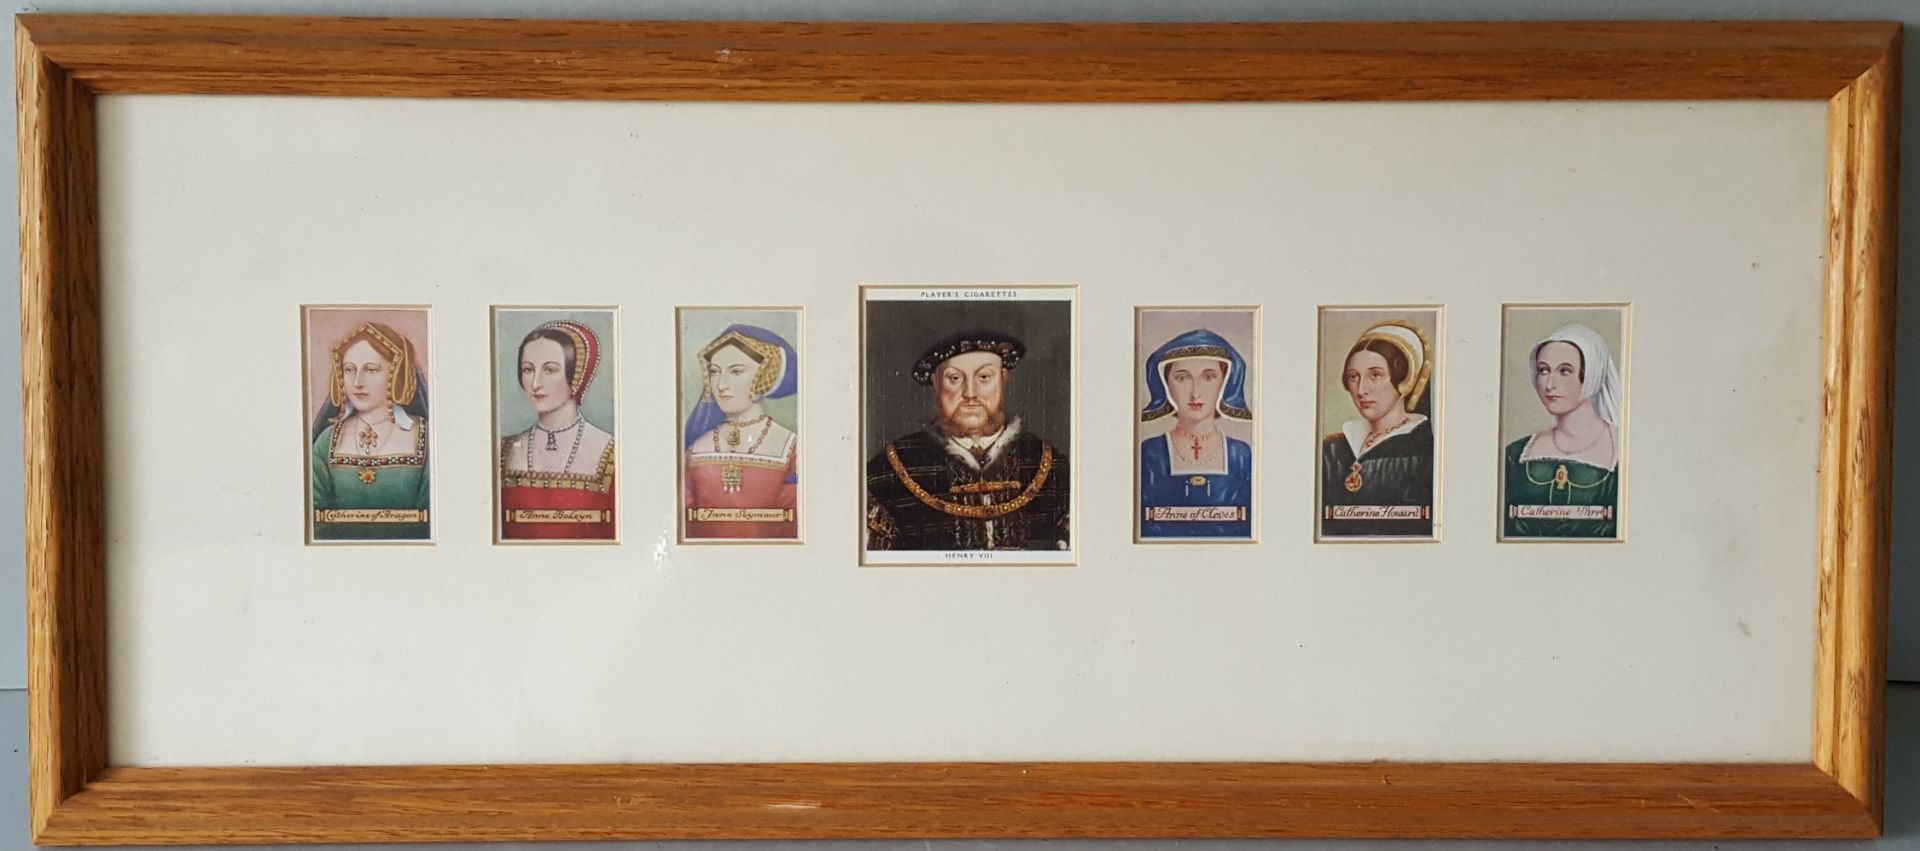 Antique Vintage Retro Framed Cigarette Cards Players Henry VIII and His 6 Wives NO RESERVE